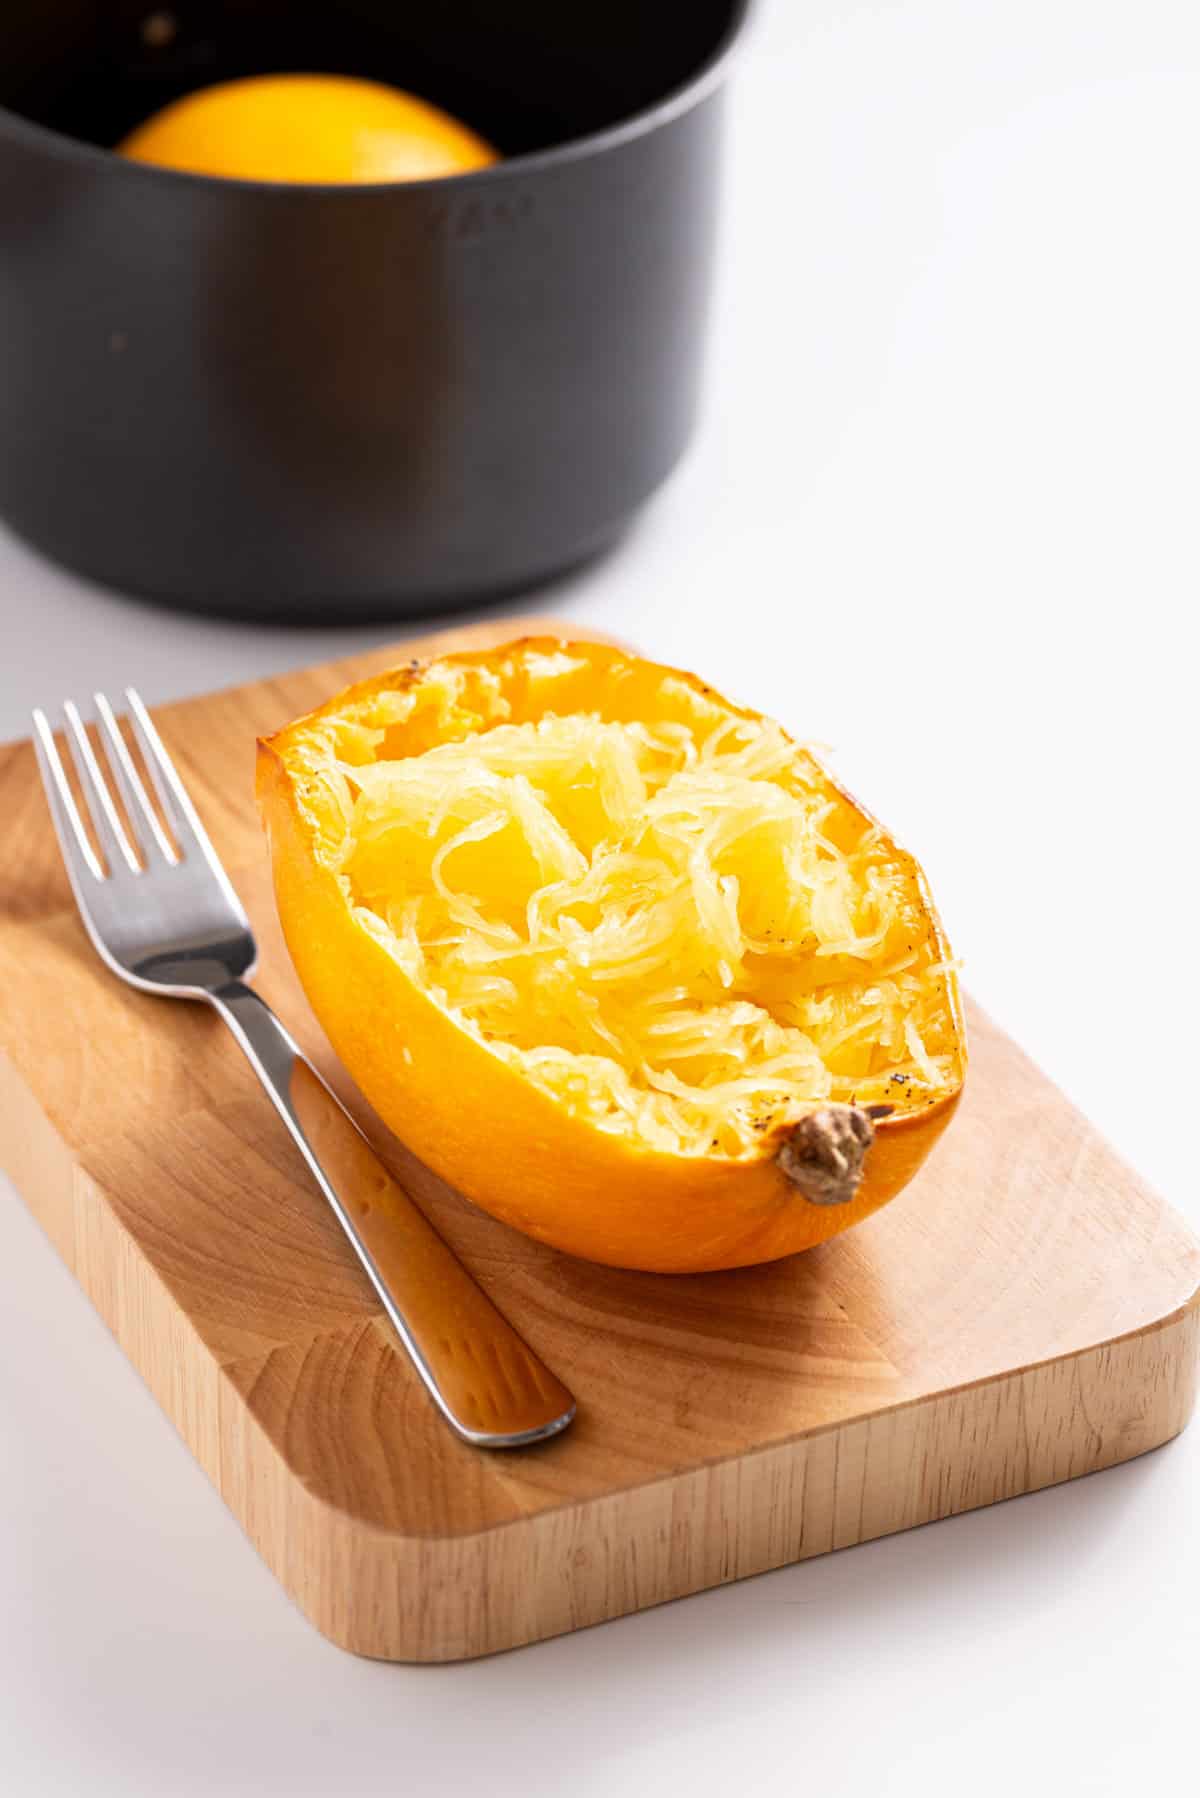 An image of spaghetti squash with the strands scraped.